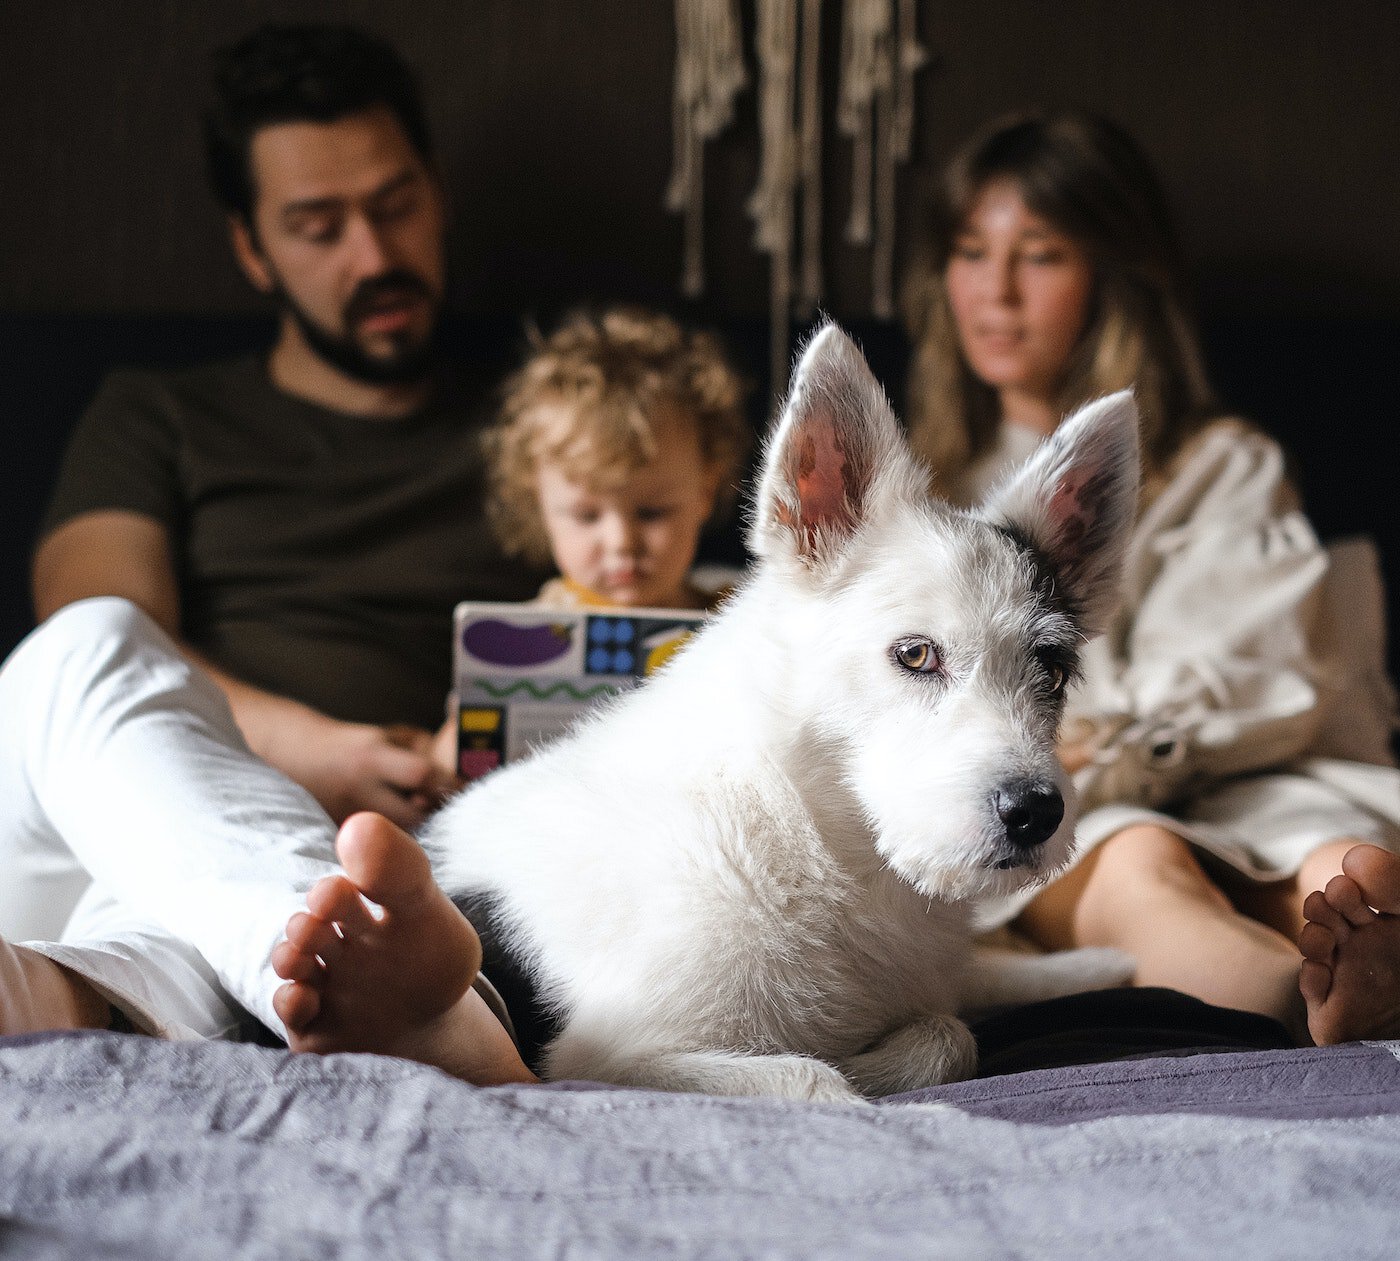 Family reading together on the bed with their dog at their feet